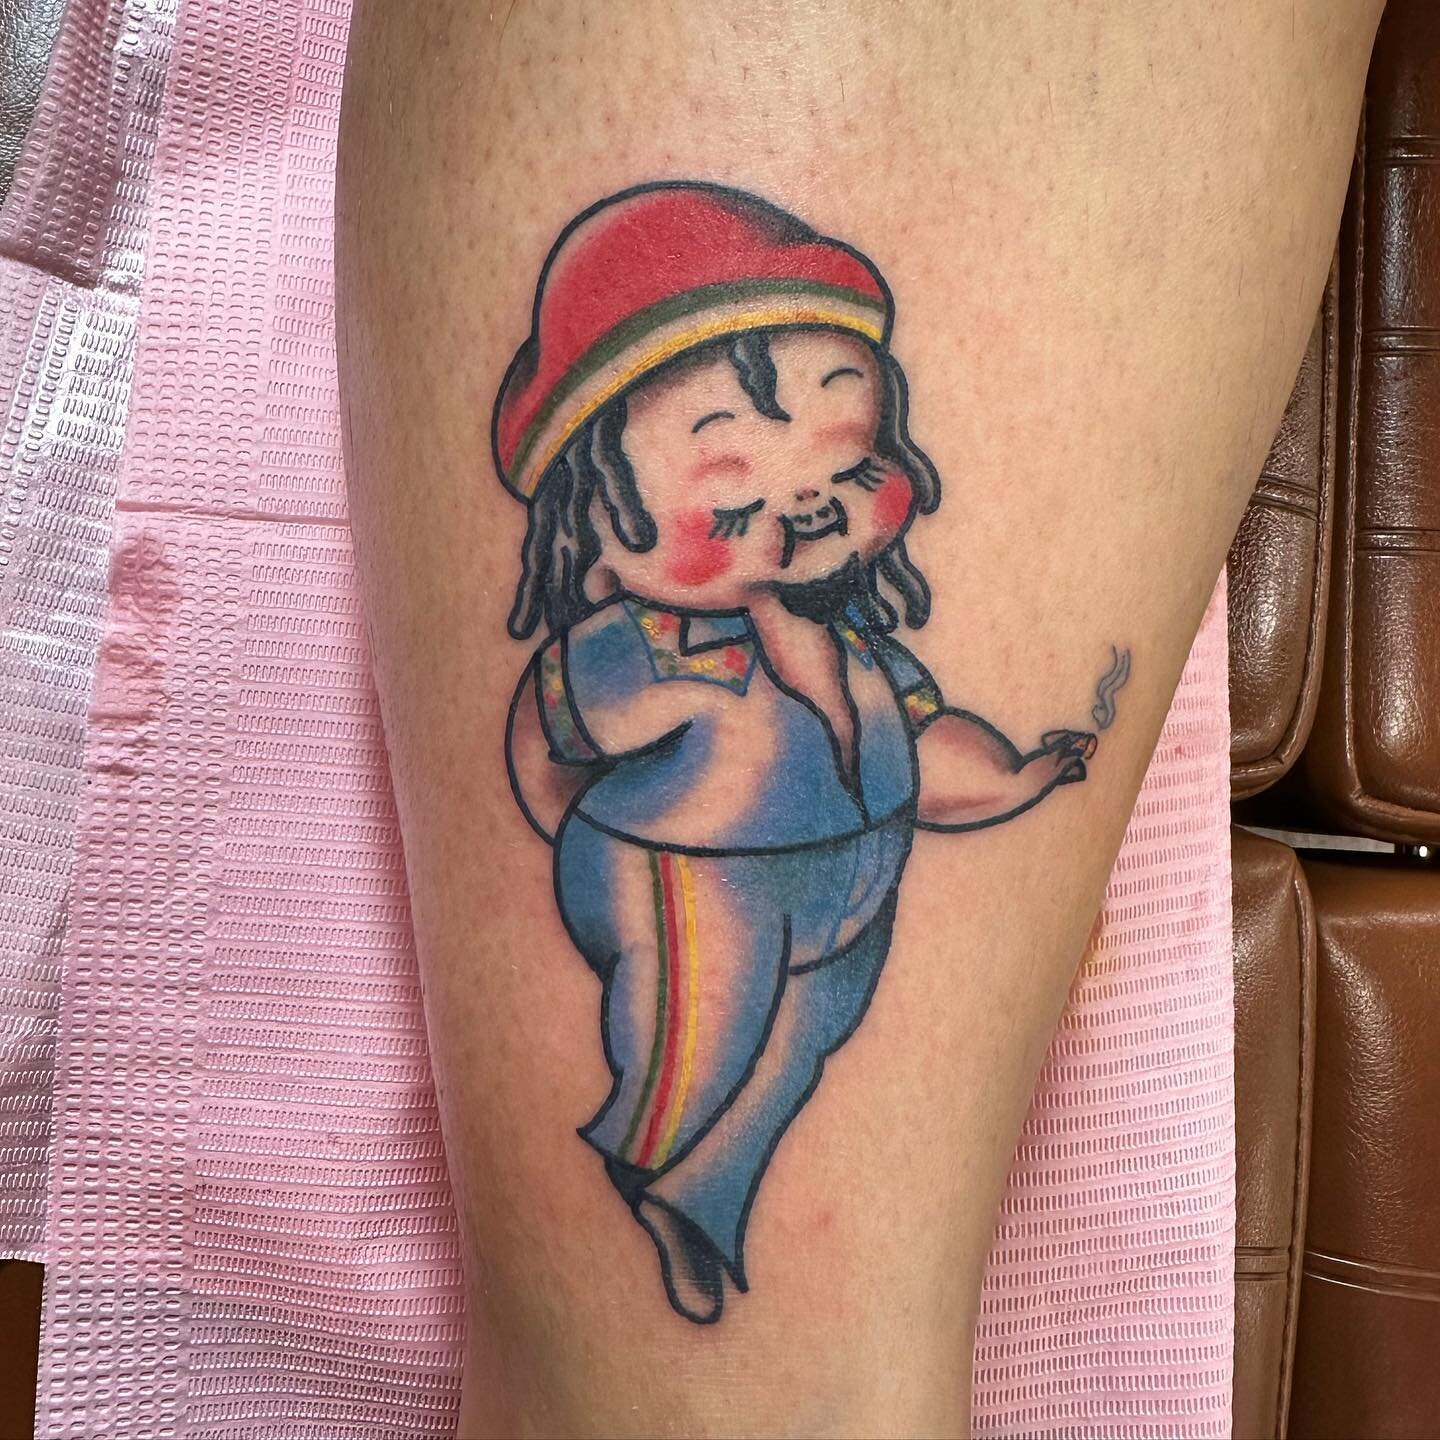 ✨Bob Marley Kewpie✨ for my friend @shayleenoel! Thank you for the continued freedom and trust. Love how he turned out. MORE kewpies!!! #bobmarley #bobmarleytattoo #kewpie #kewpietattoo #tattoo #tattoos #kankakeetattoo #kankakeecounty #bradleyillinois